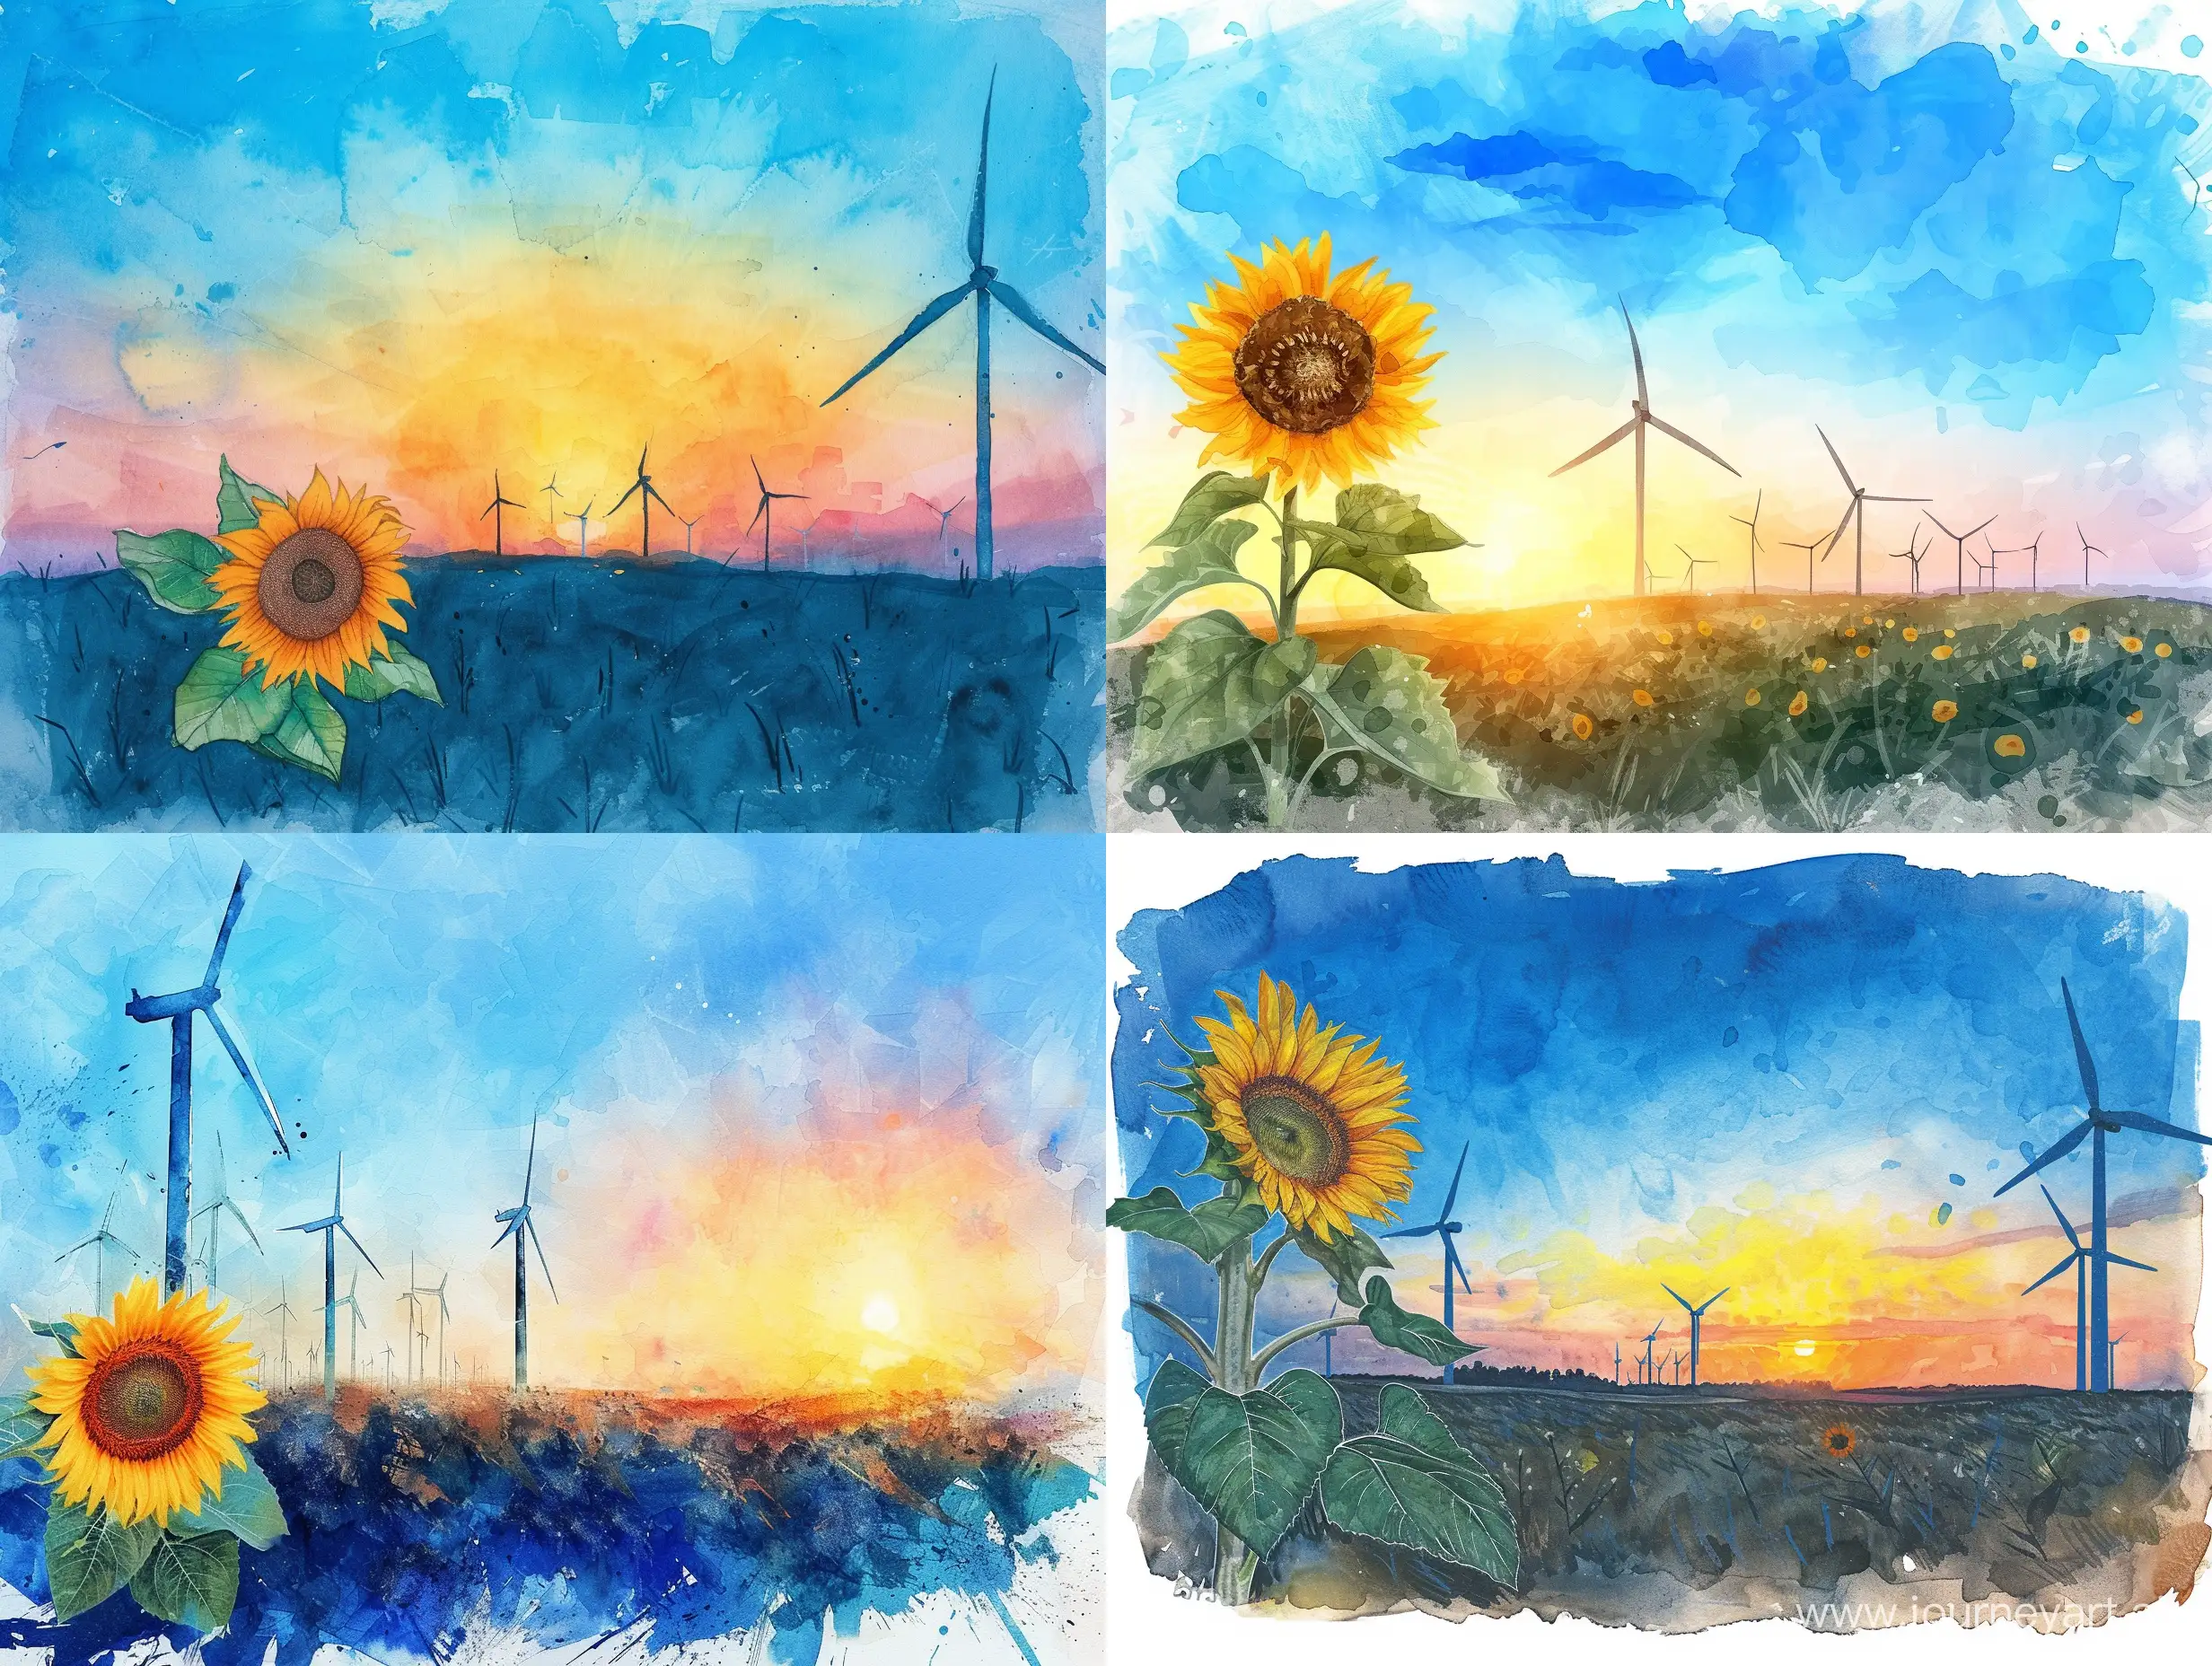 A field with a sunflower, on which there are wind turbines, against the background of a blue sunset sky, without clouds, artistically, watercolor, Claude Monet style